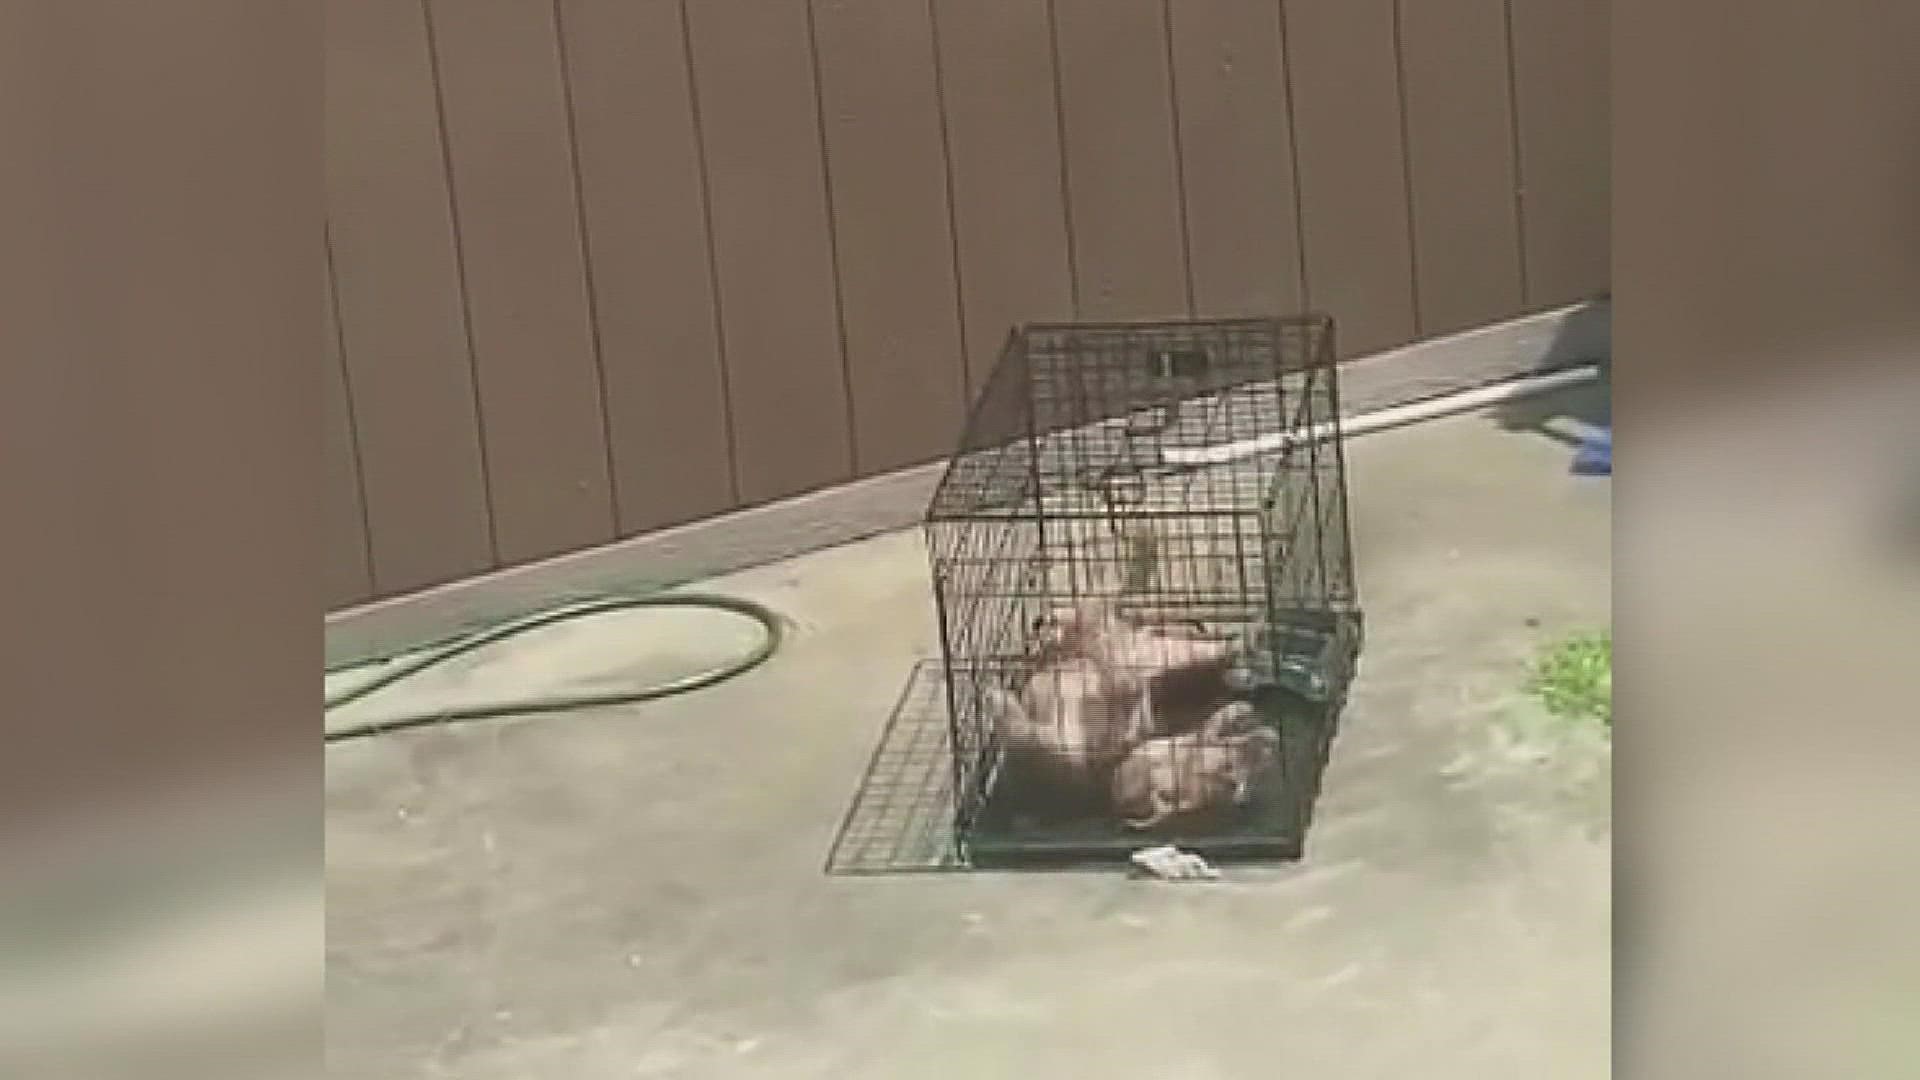 Police said the puppy was found in a kennel in direct sunlight with no food, water or shade.